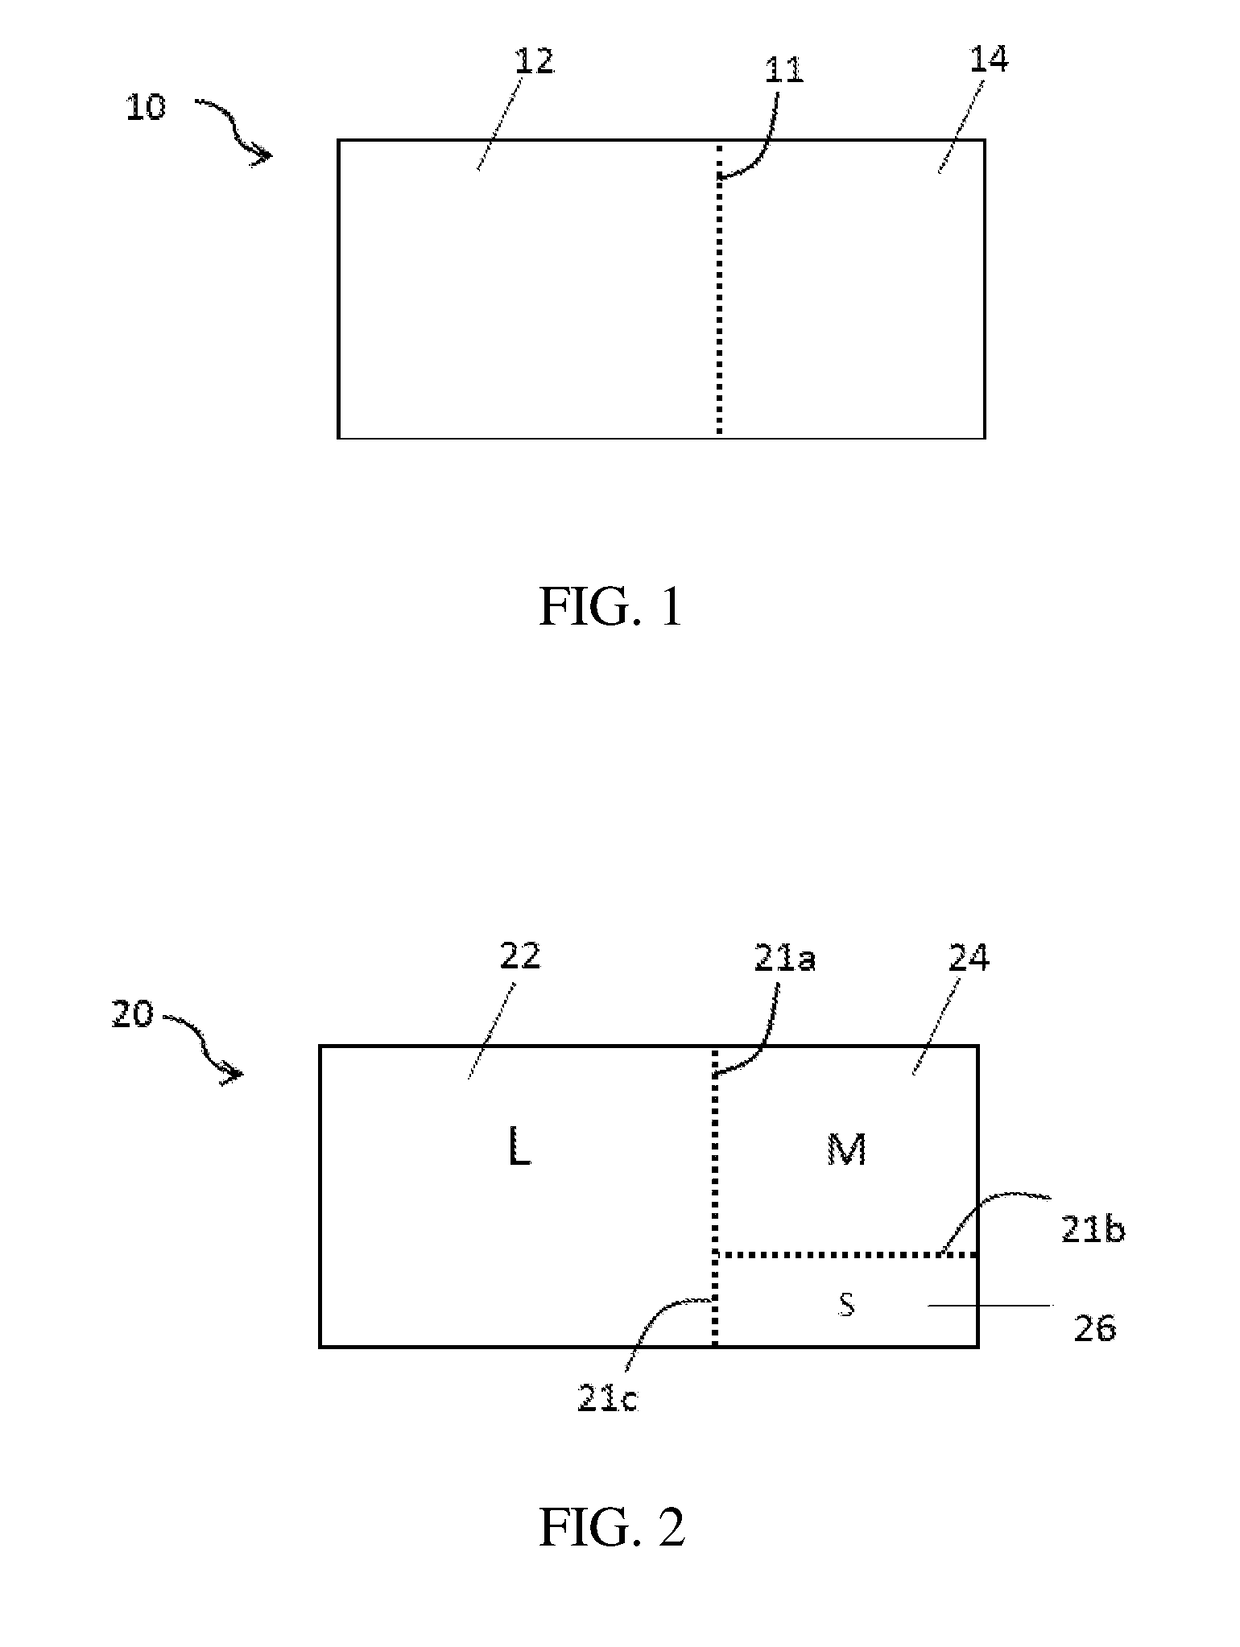 Laundry detergent sheet comprising lines of frangibility